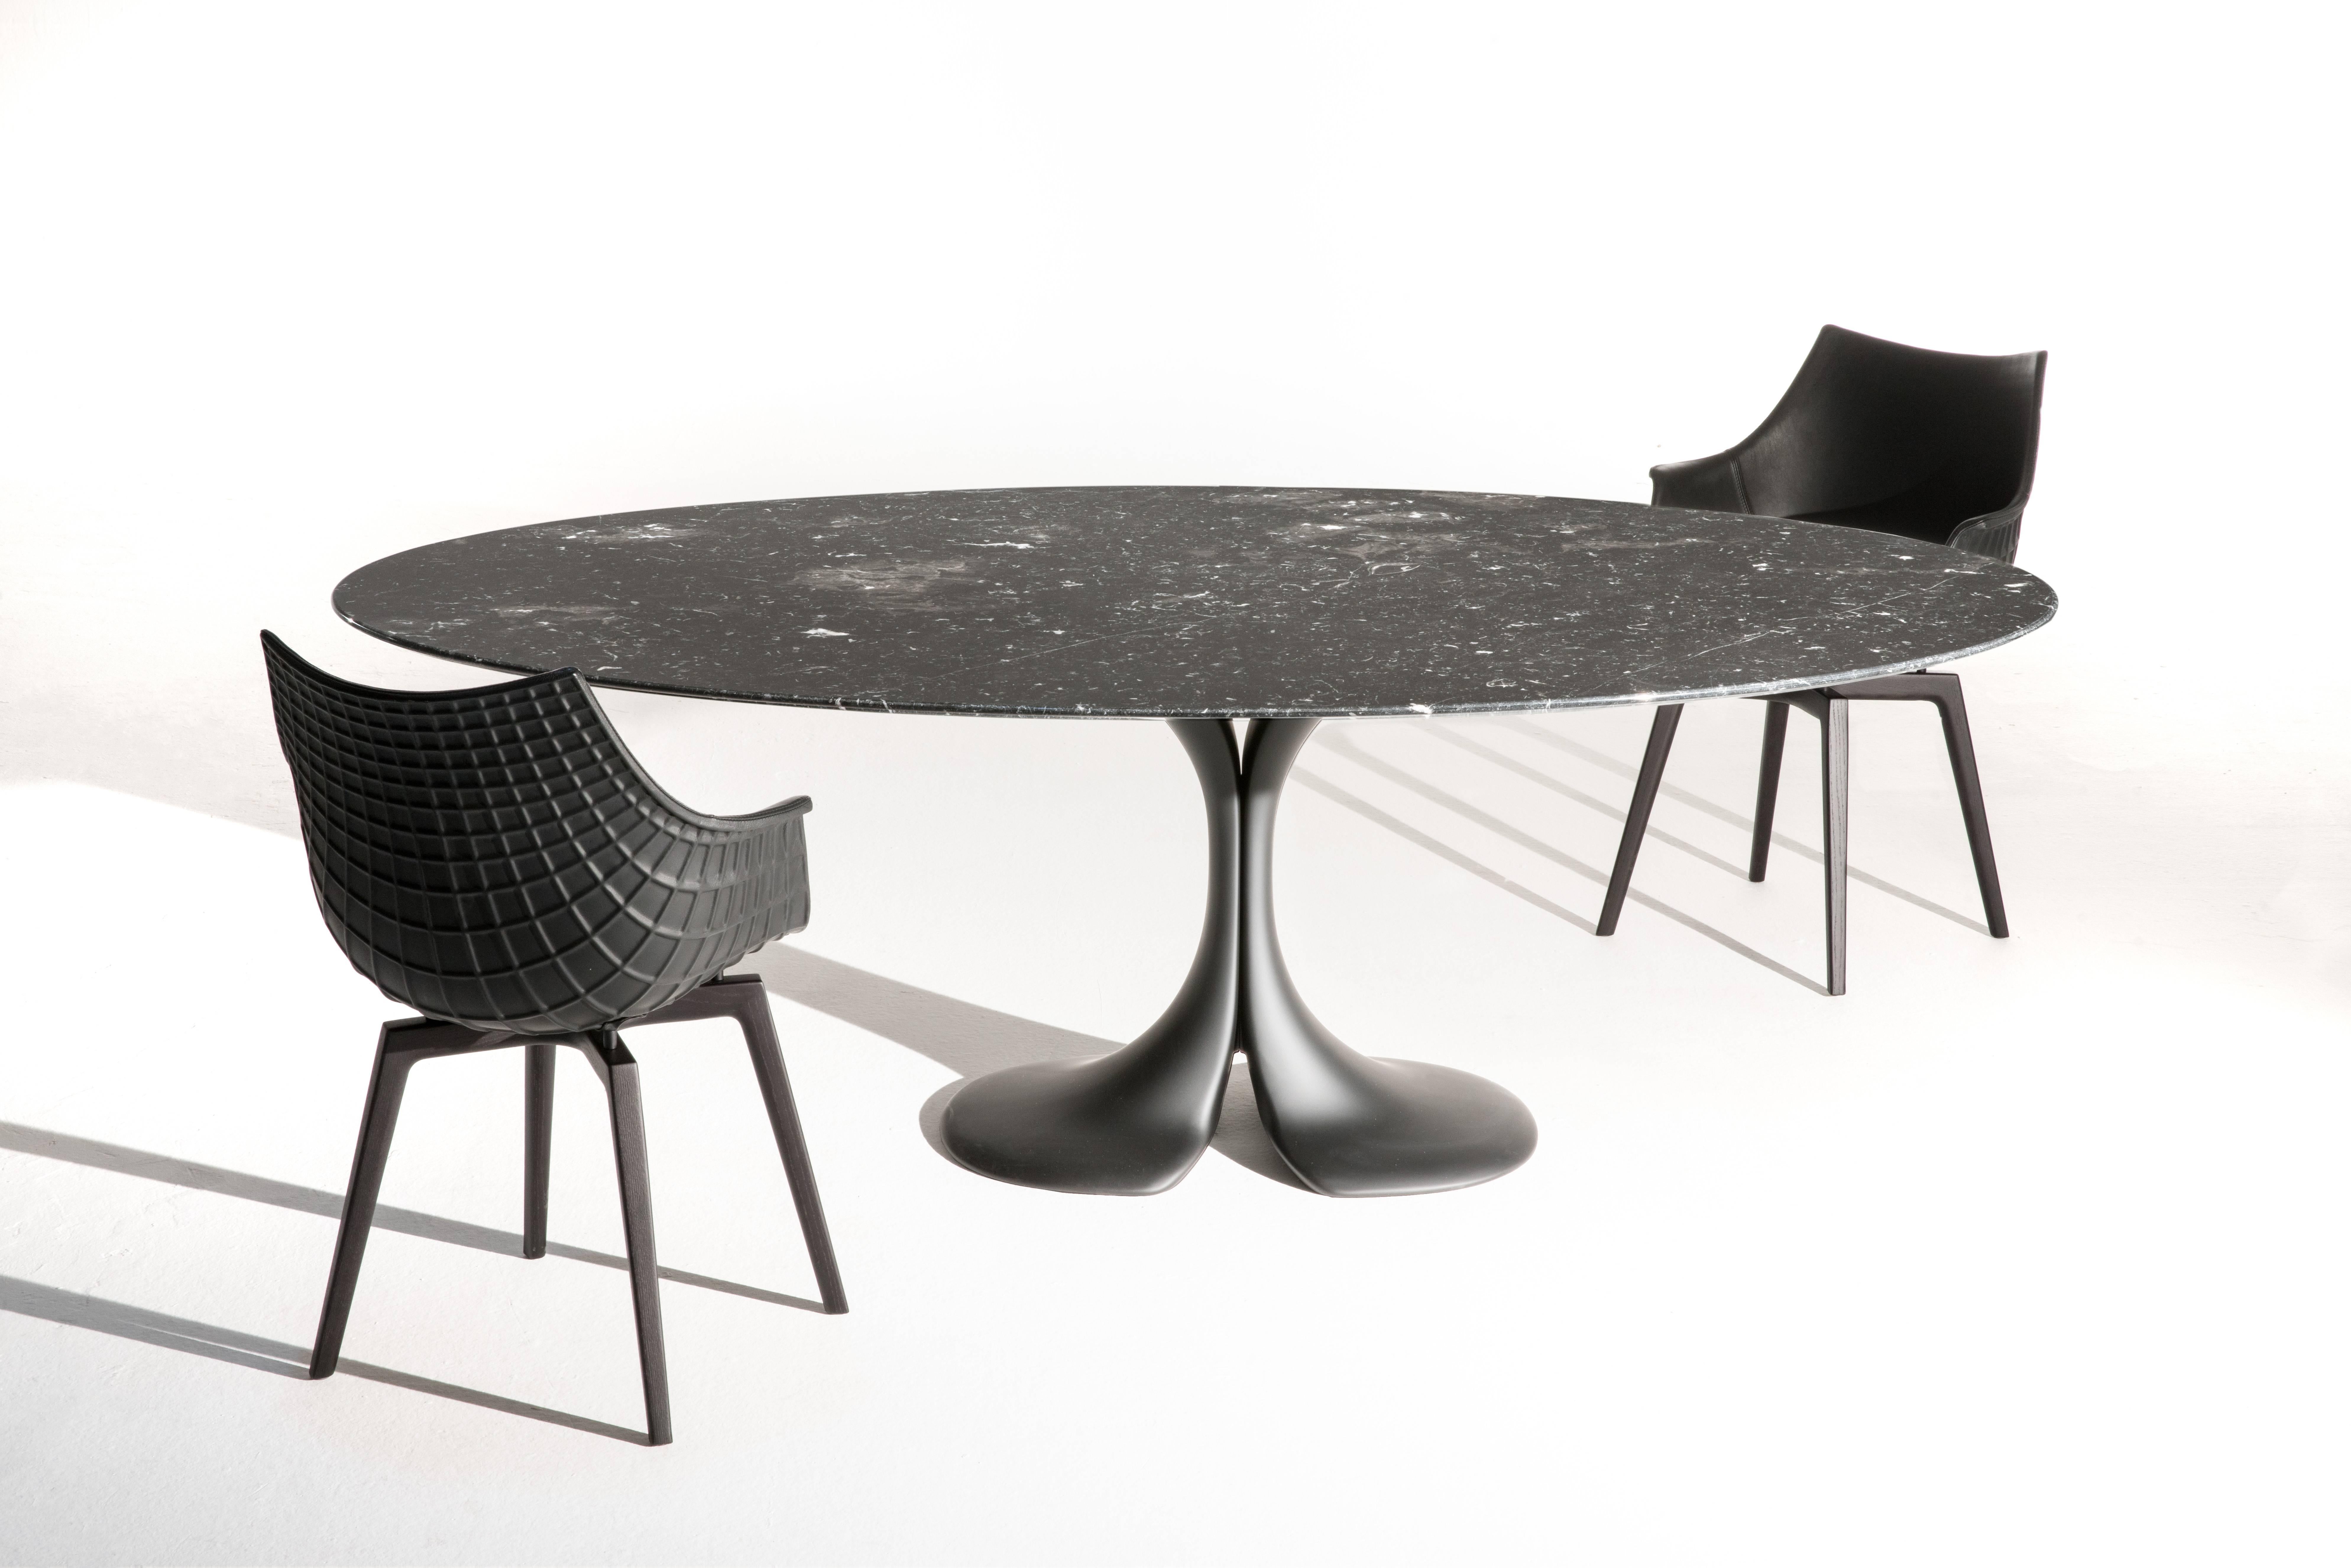 On its fiftieth anniversary, Driade modifies the design of an iconic table, for which, in its original version, Antonia Astoria had balanced the elegant minimalism of the top with a sculptural base made of a material just as malleable as it was